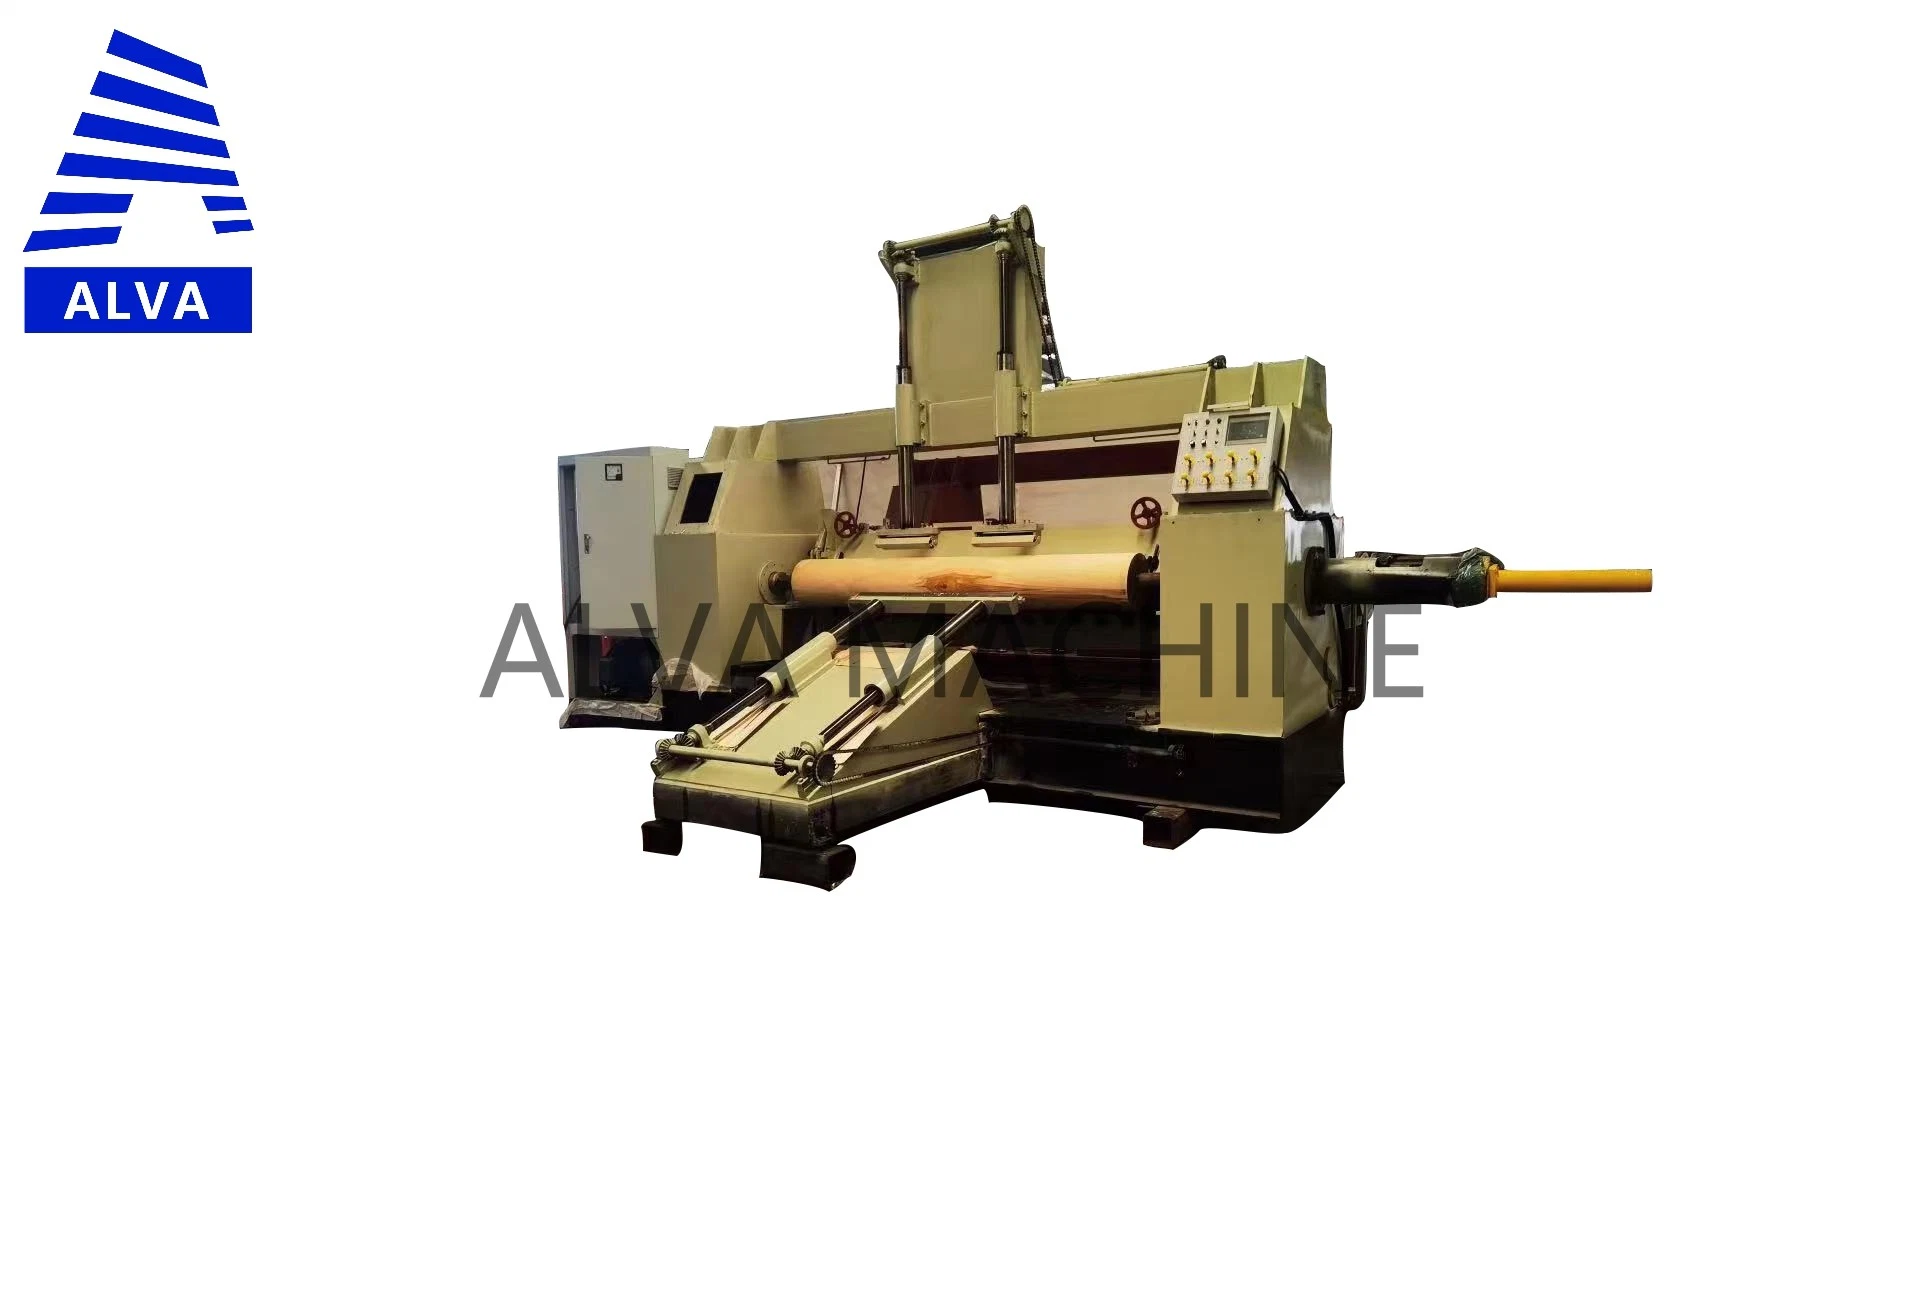 Chinese Alva Fully Automatic Rotary Cutting Machine, CNC Card Free Rotary Cutting Machine, Plywood Manufacturing Equipment